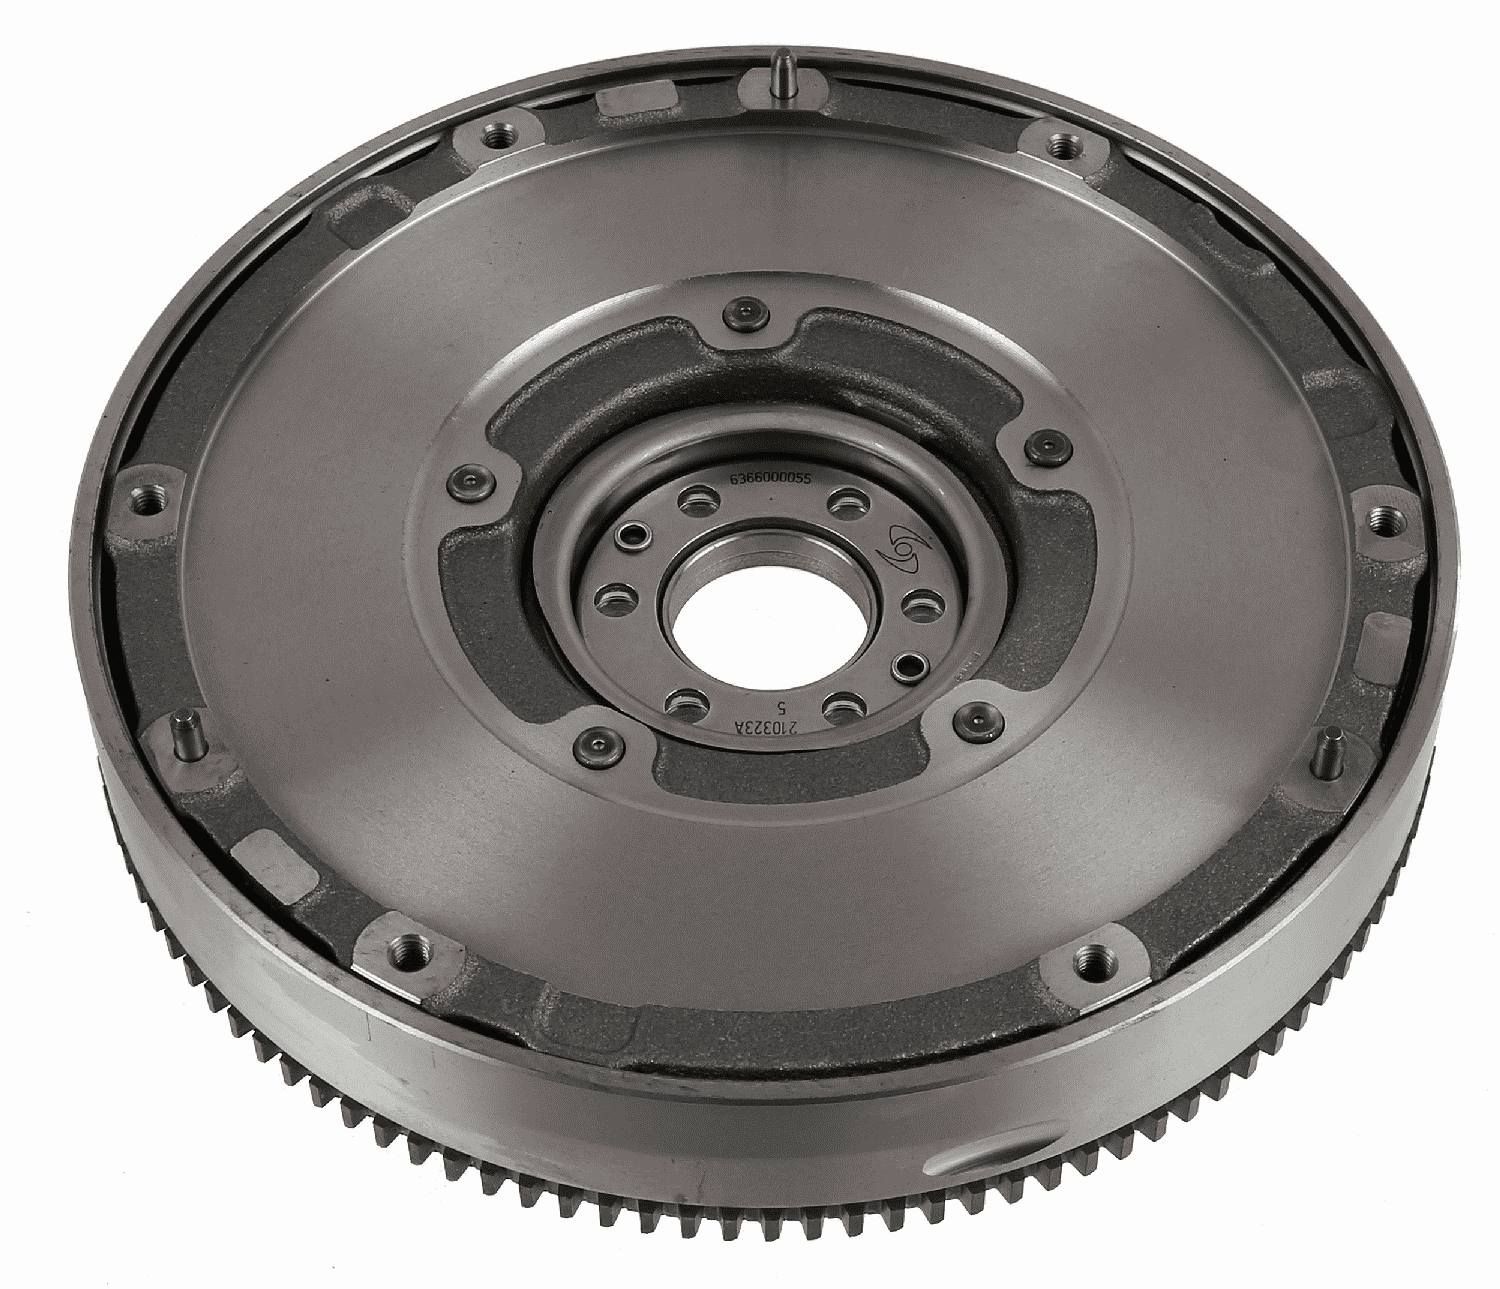 Clutch flywheel 6366 000 055 Ford FOCUS 2016 – buy replacement parts